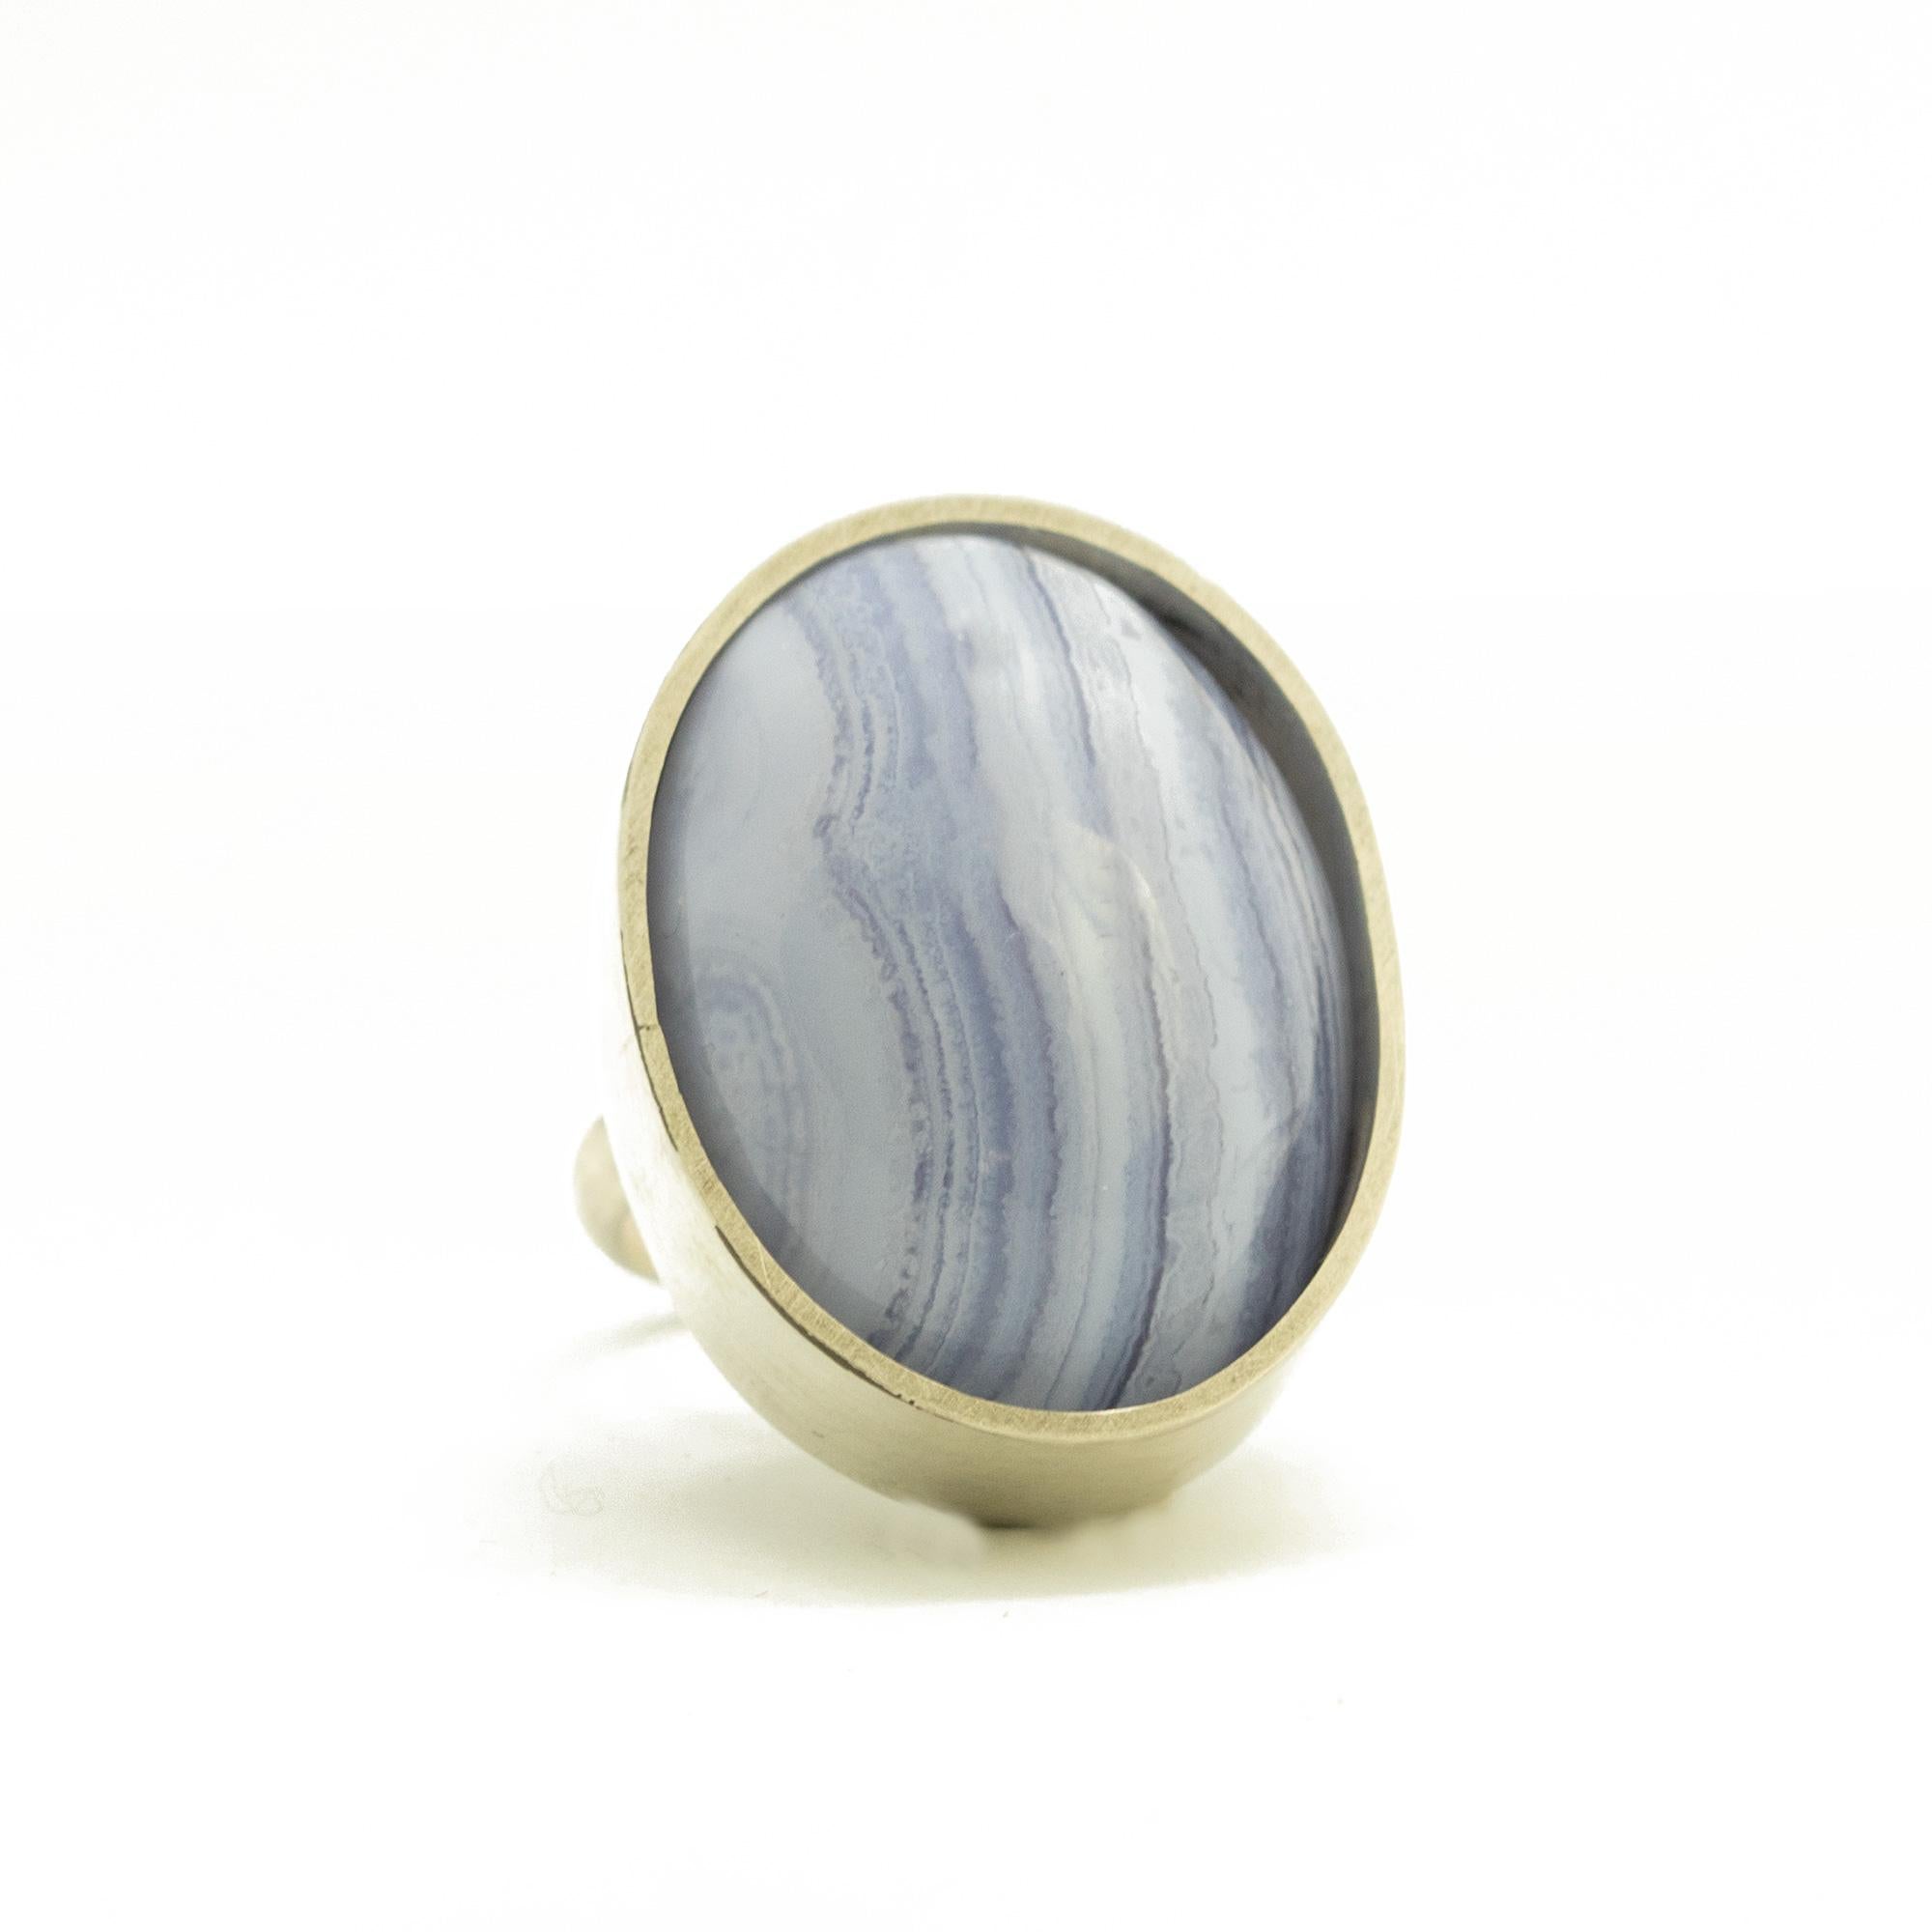 Artistry ring, 100% Handmade in Italy with high quality semi-precious stone.

• 925 Sterling Silver
• Chalcedony Oval Cabochon 2.8 x 2.0 cm, 45 carats
• Total weight 22.2 g
• Size: 6.5 (US), 13 (France),  53 (Italy). Size can be re-adjusted

Please